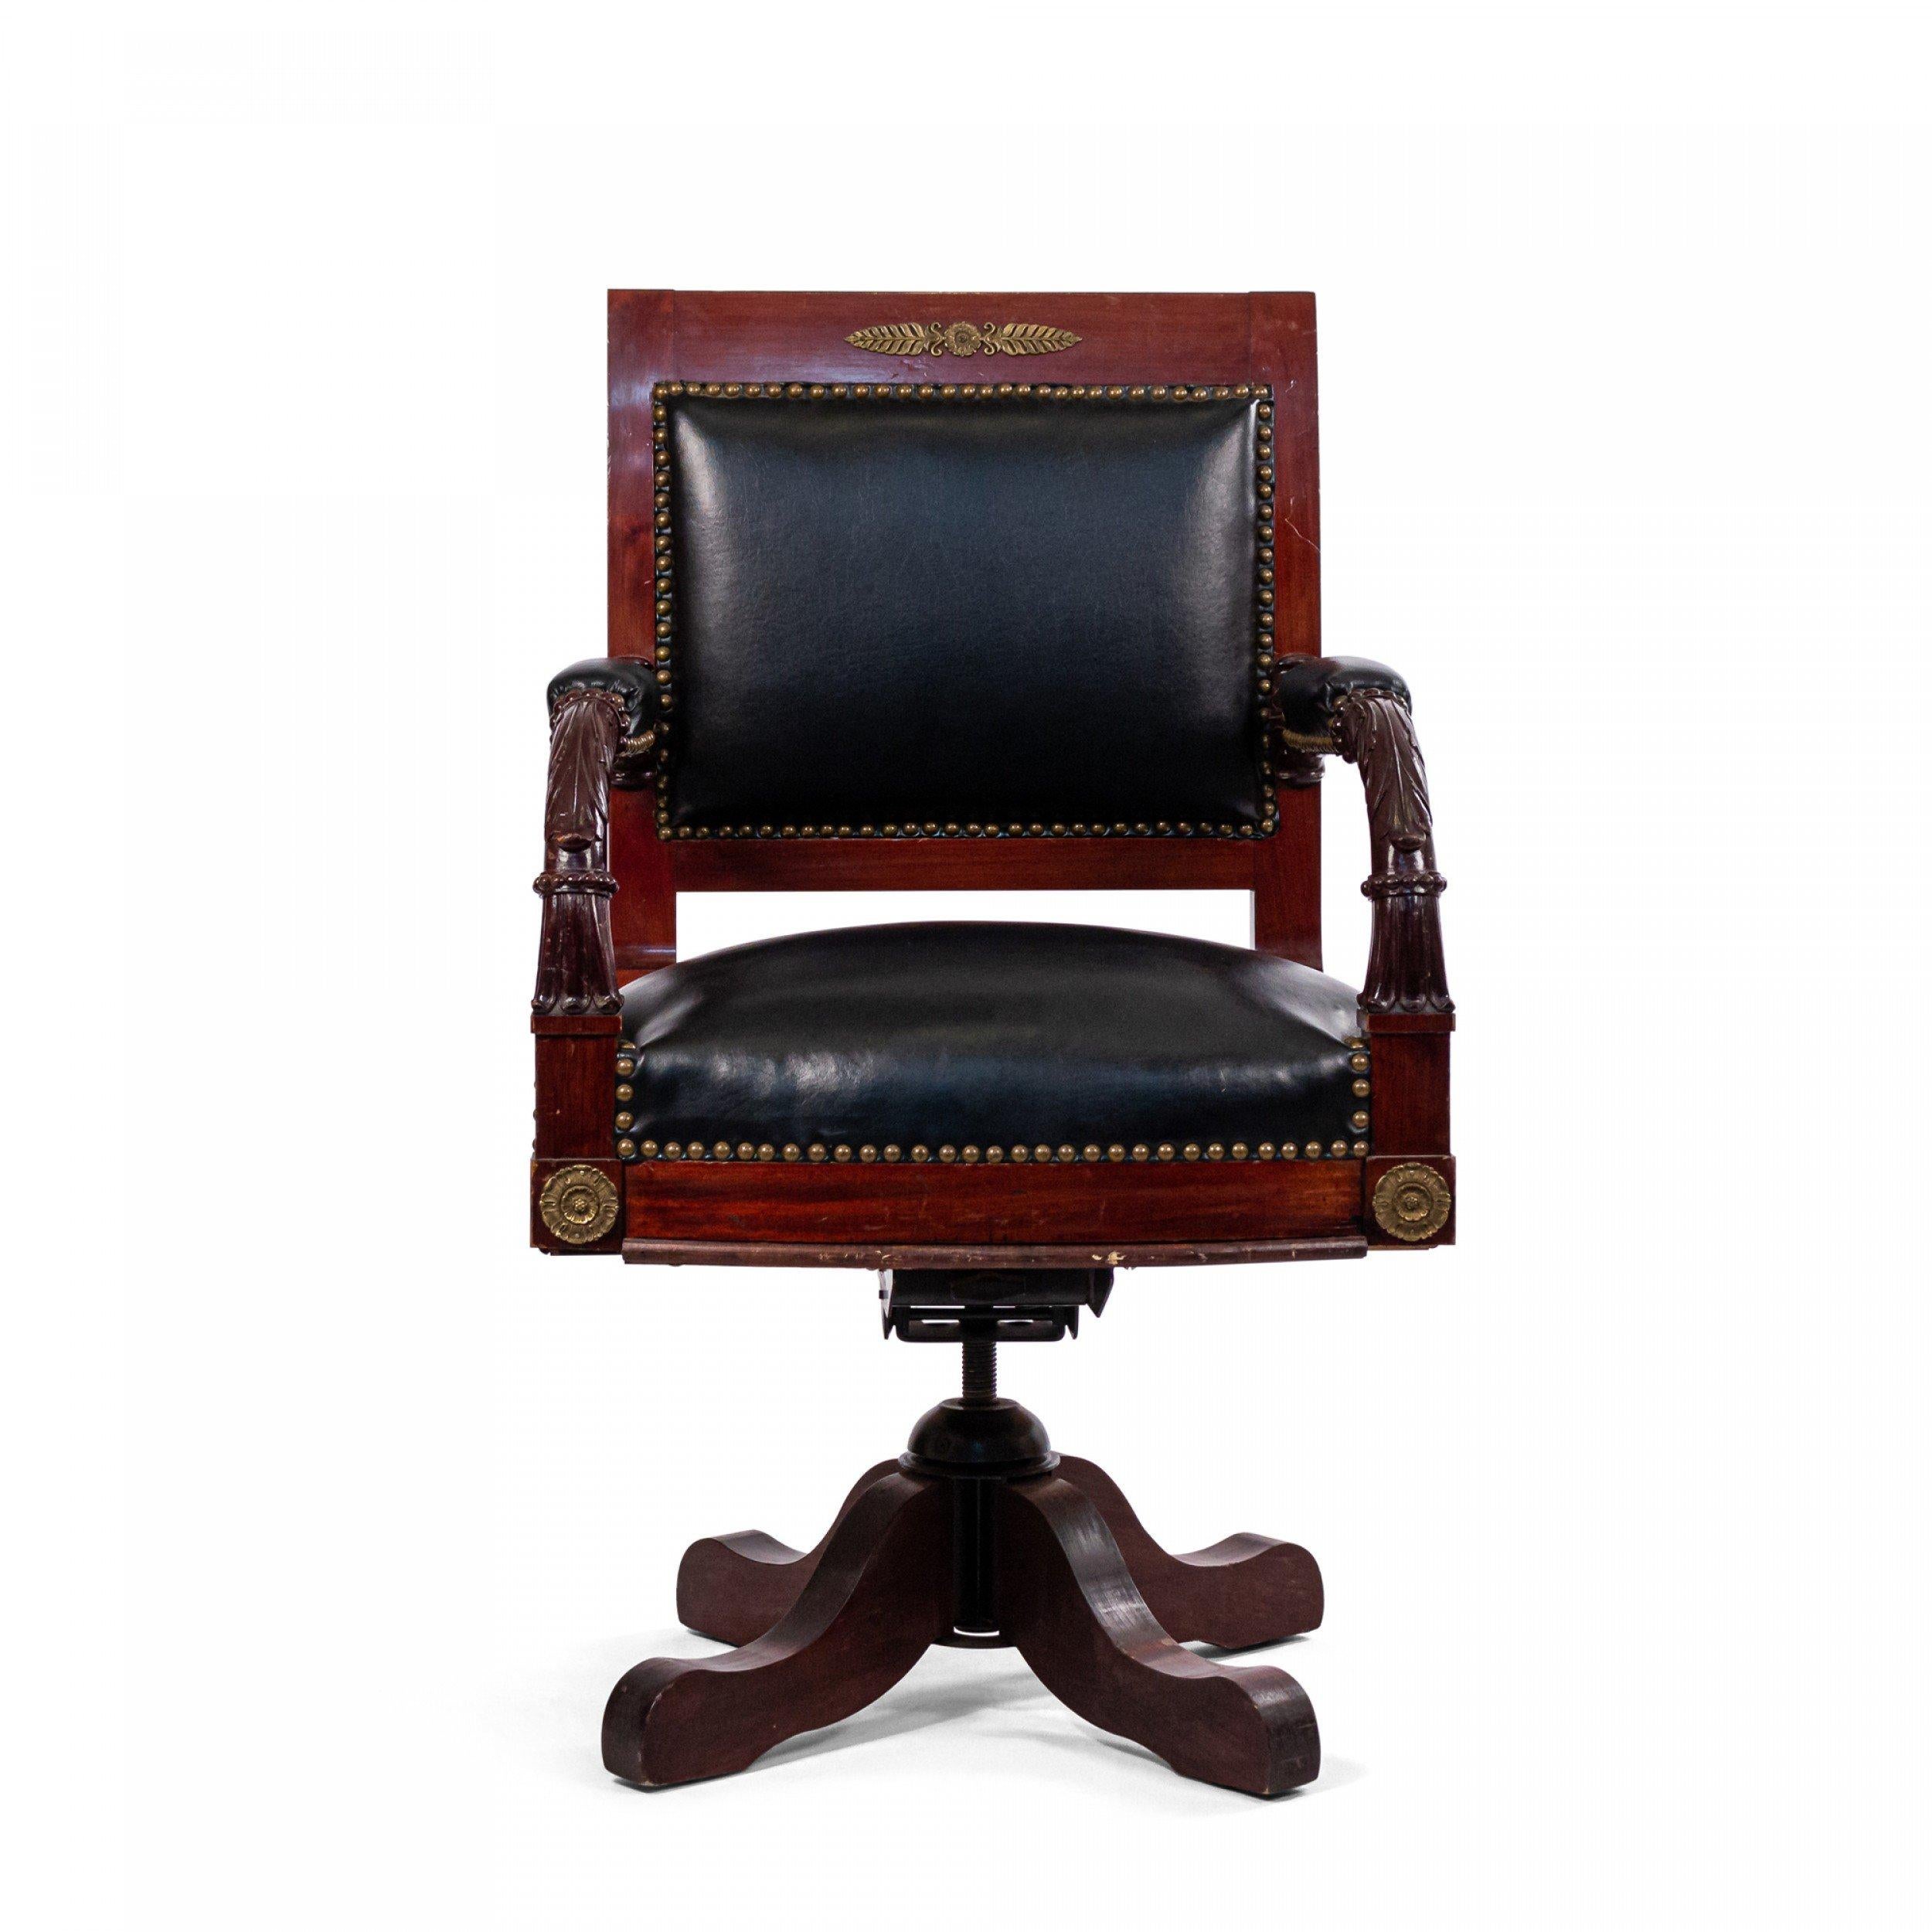 19th Century French Empire style ormolu mounted mahogany open swivel base arm chair with black leather seat and back.